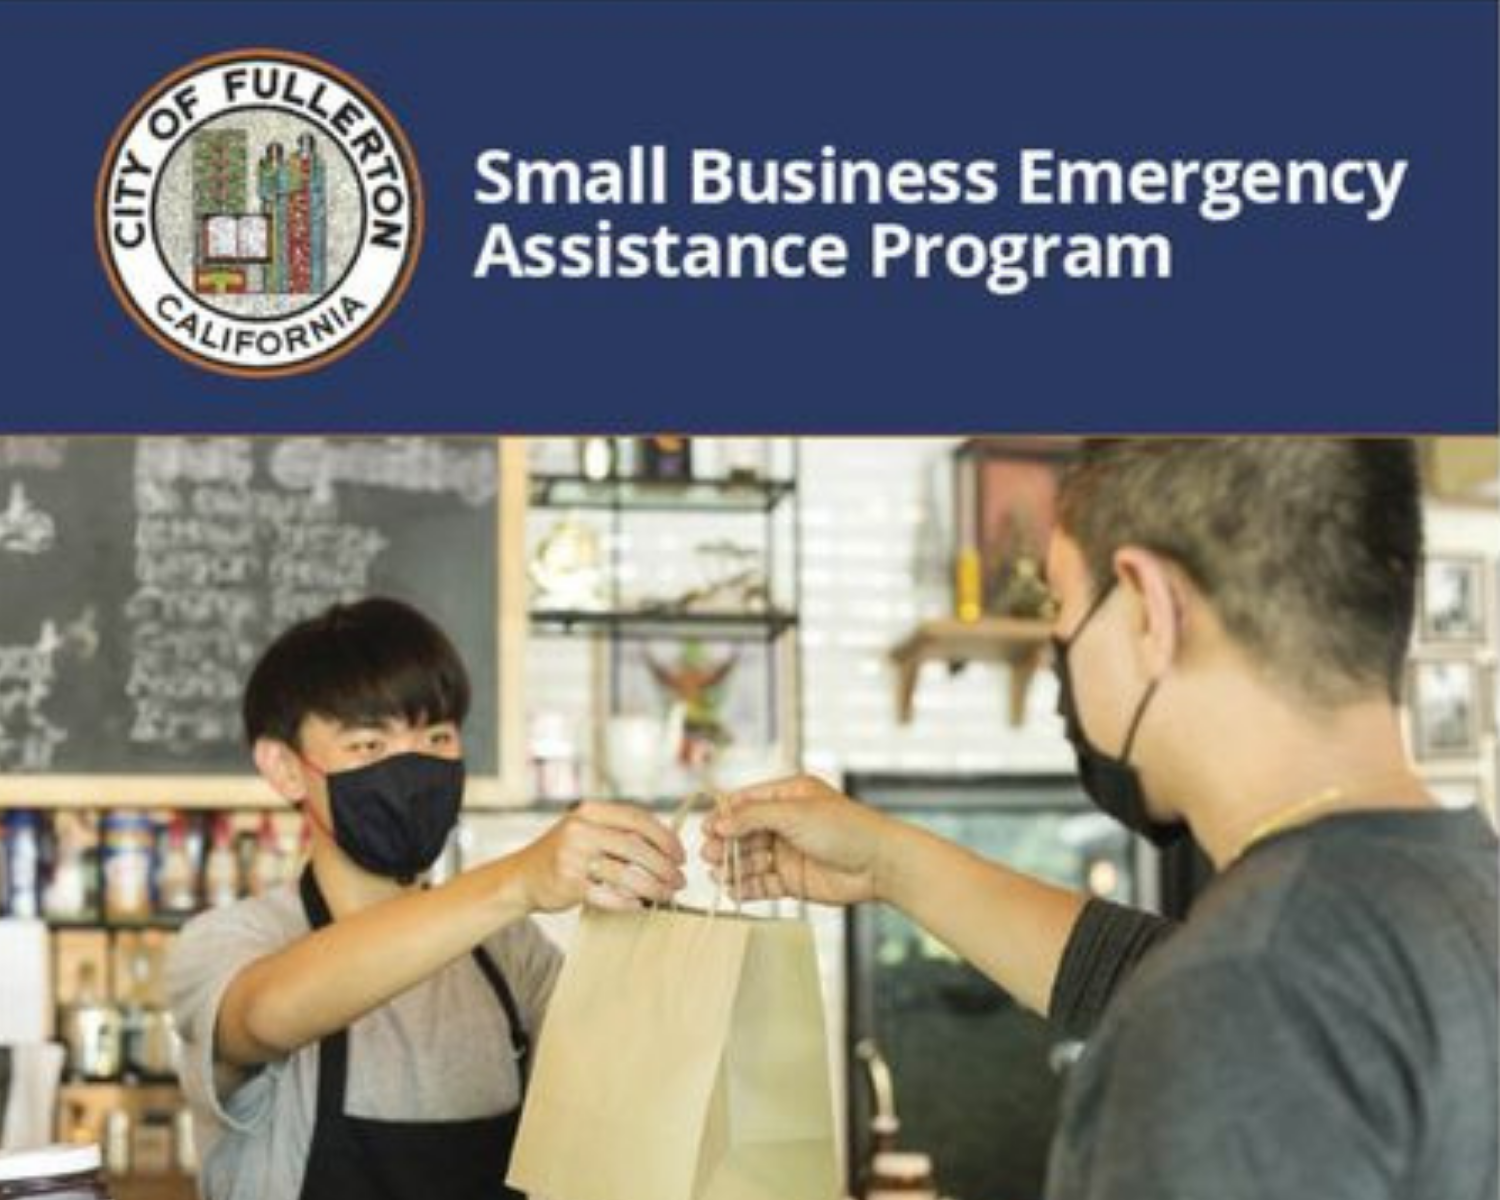 Small Business Emergency Assistance Program